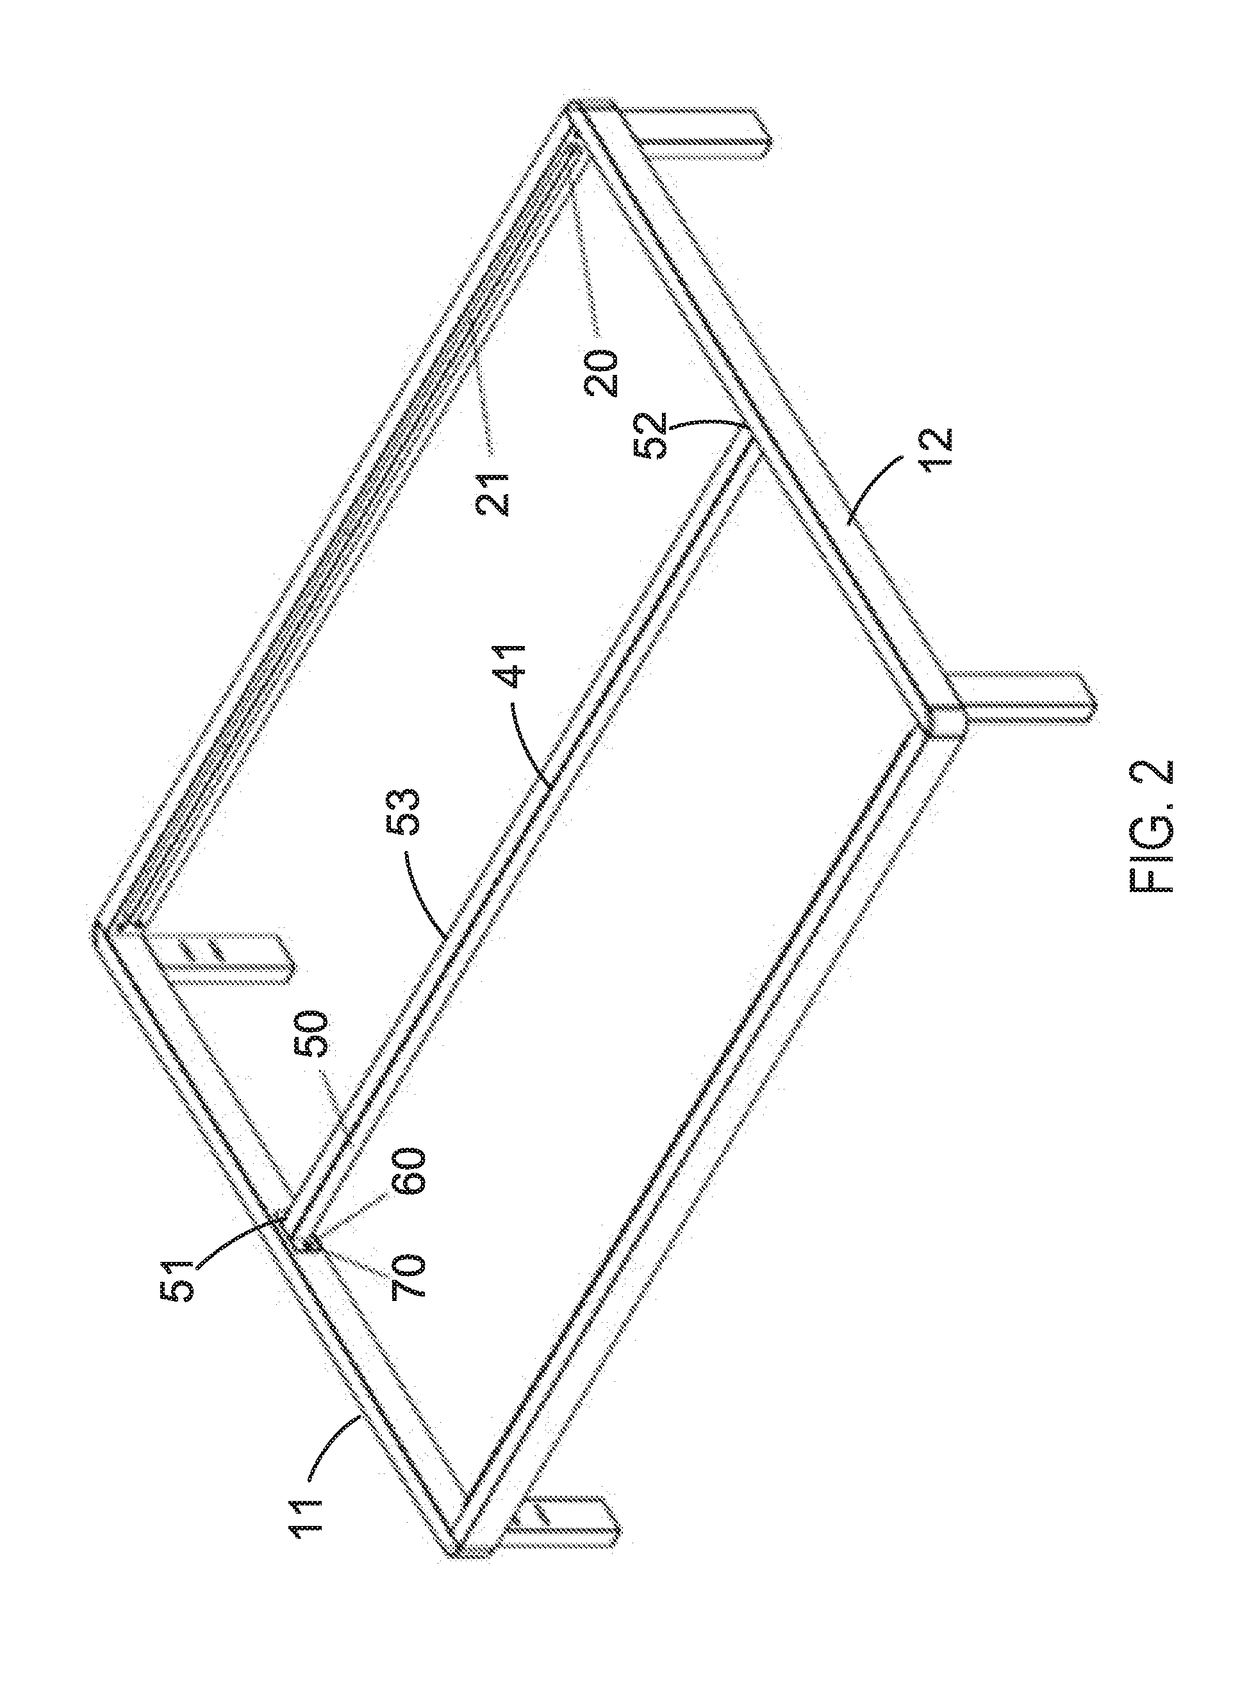 Bed and bed frame having supporting bars coupled by touch fasteners